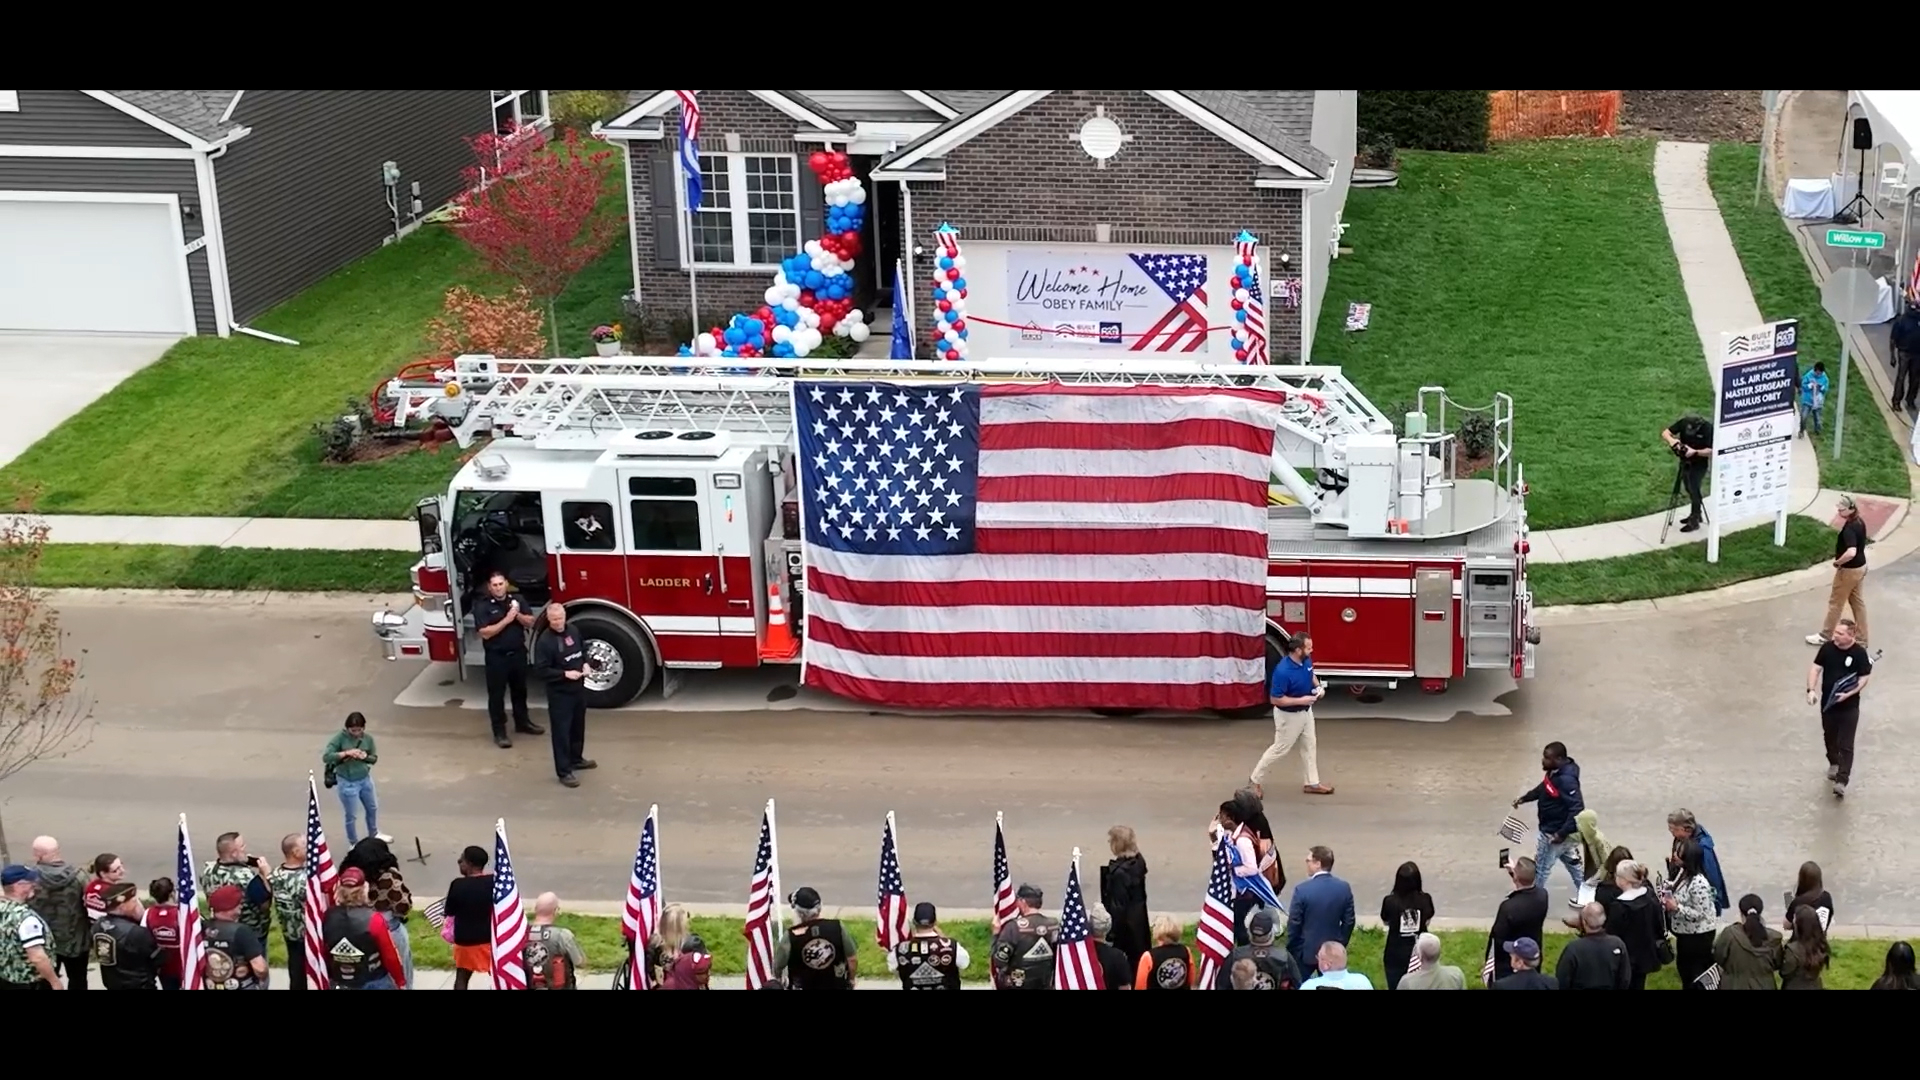 Home Dedication Ceremony for U.S. Air Force Master Sergeant Paulus Obey in Detroit, Michigan